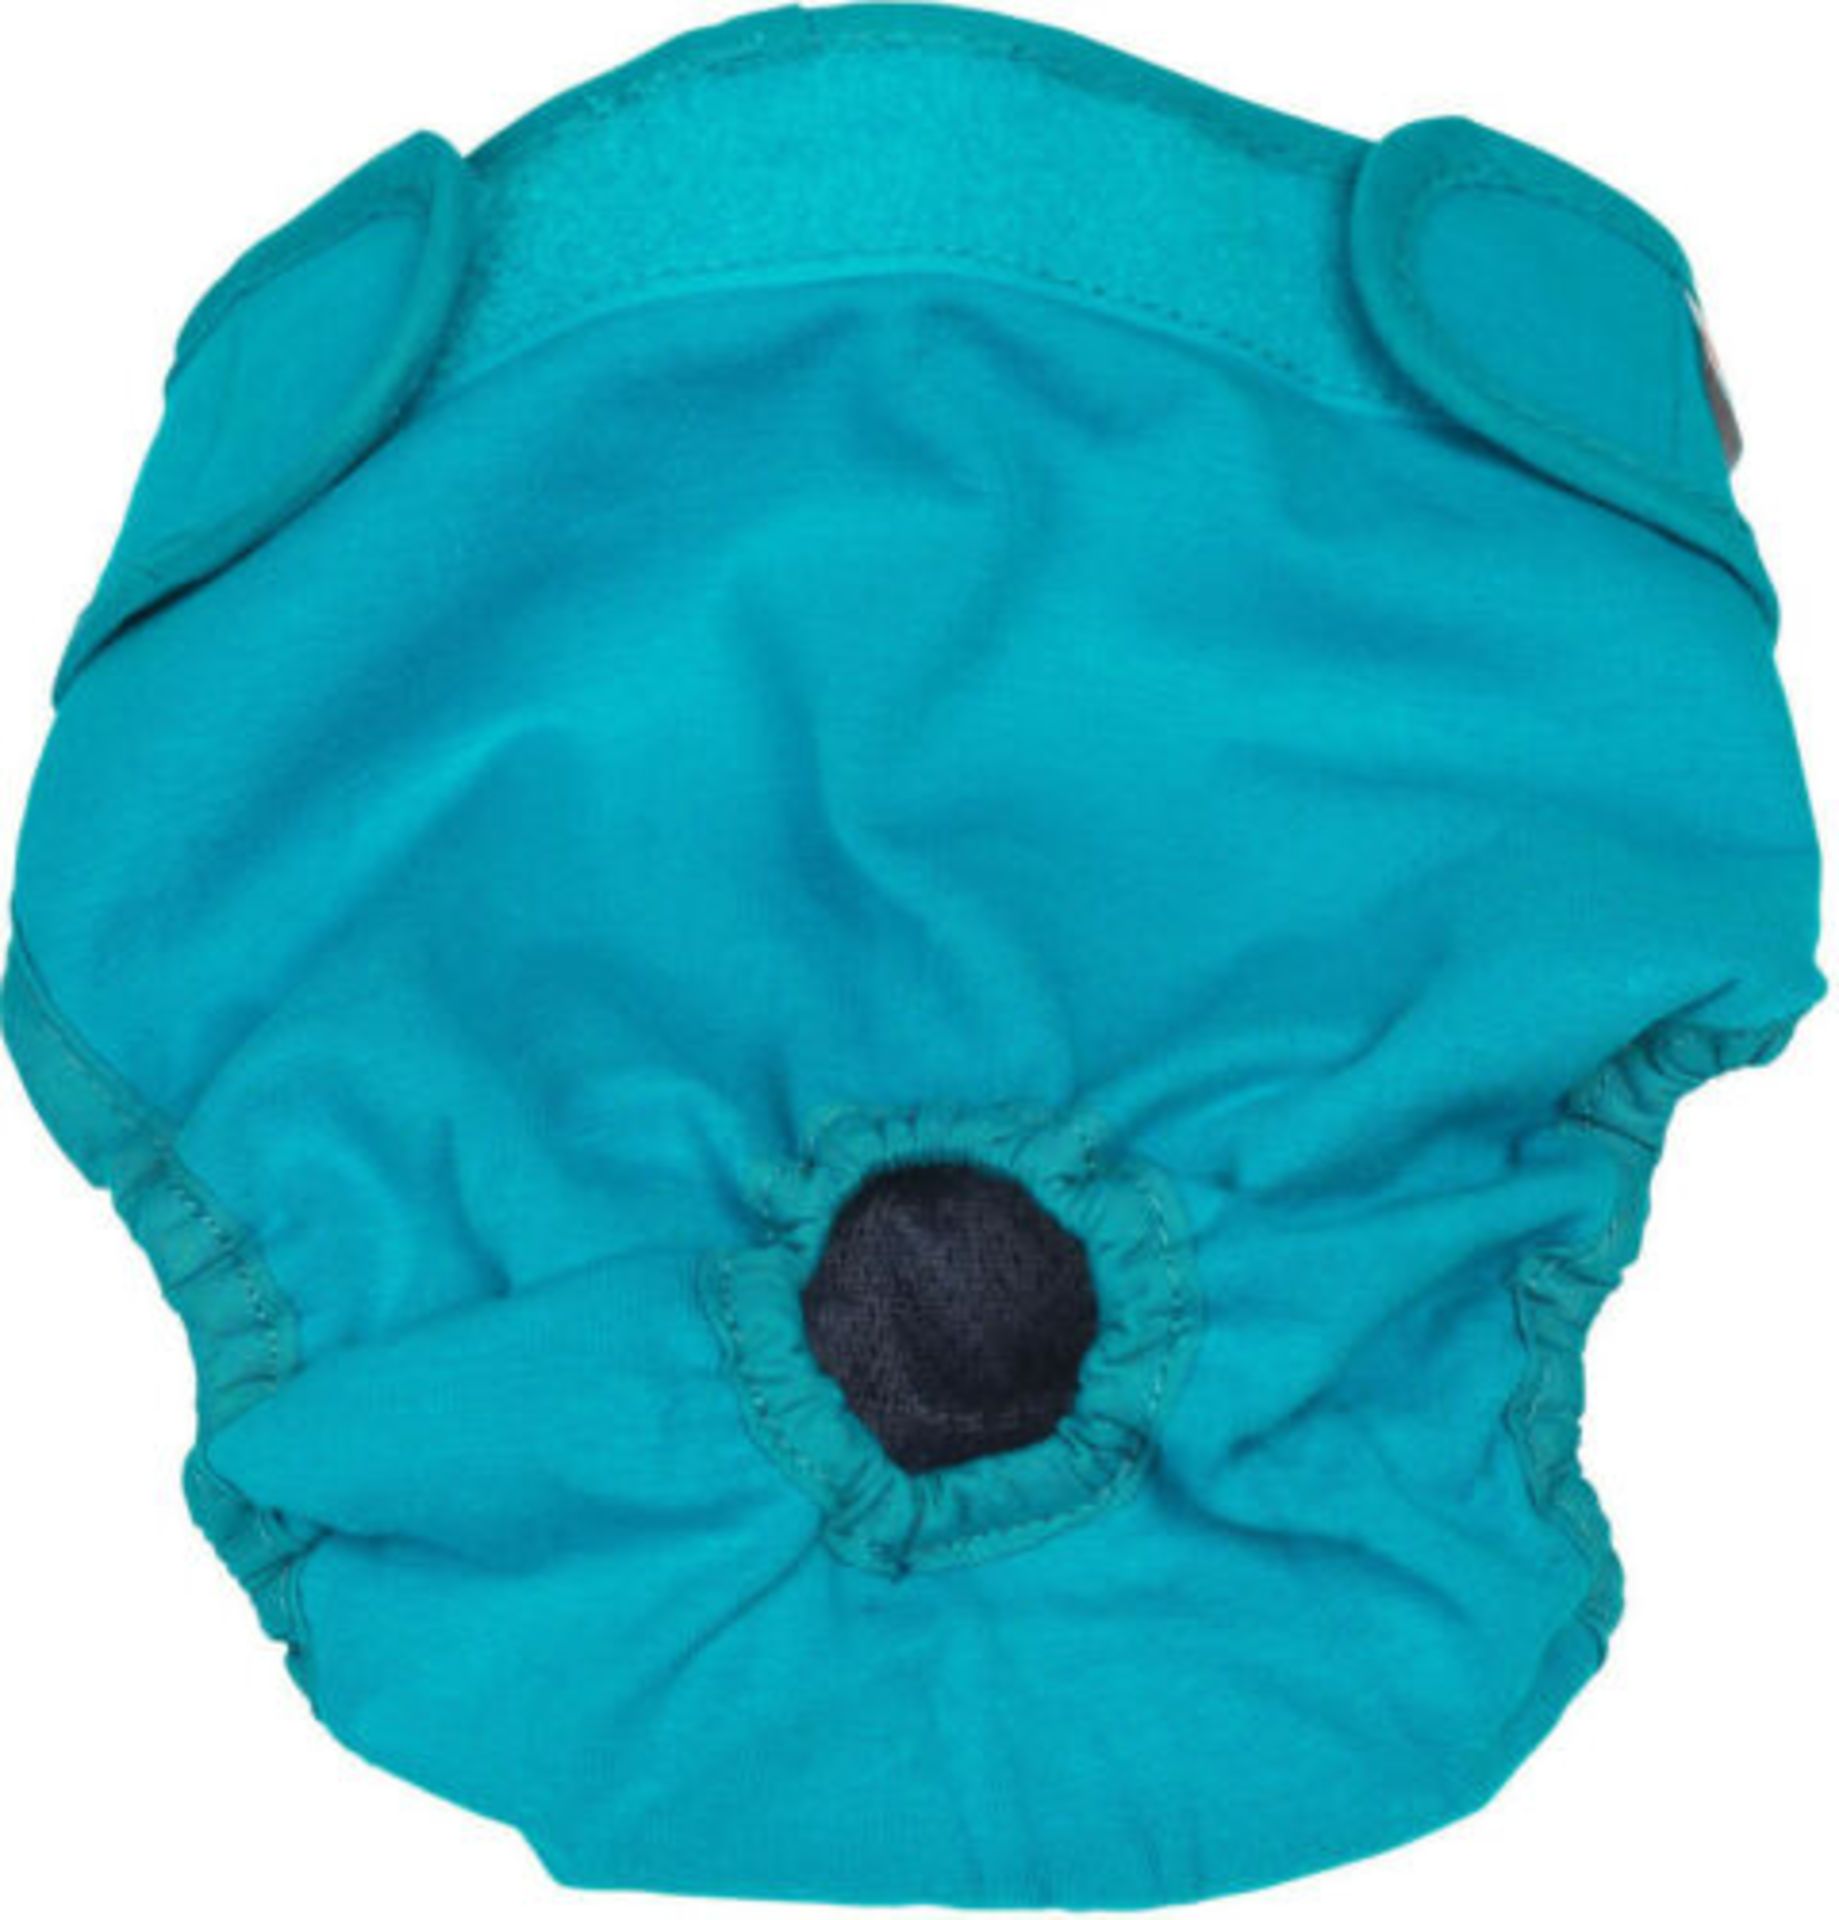 6 x Large Dog Nappy, WashabIe, Incontinence, Female in Heat no vat on hammer.You will get 6 packs. - Image 2 of 4